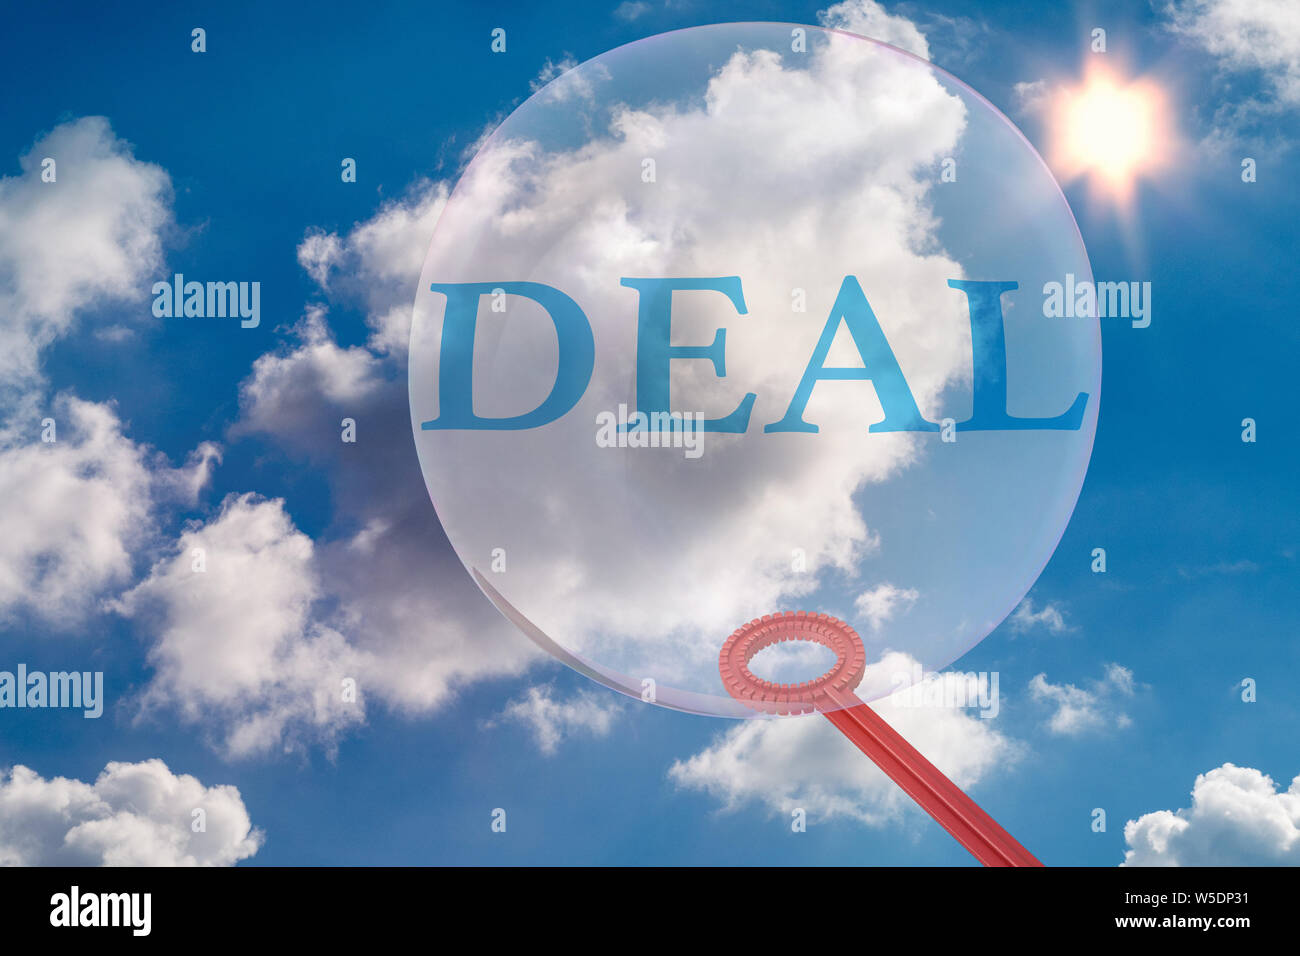 A deal threatens to burst, like a soap bubble -3d  illustration, Stock Photo